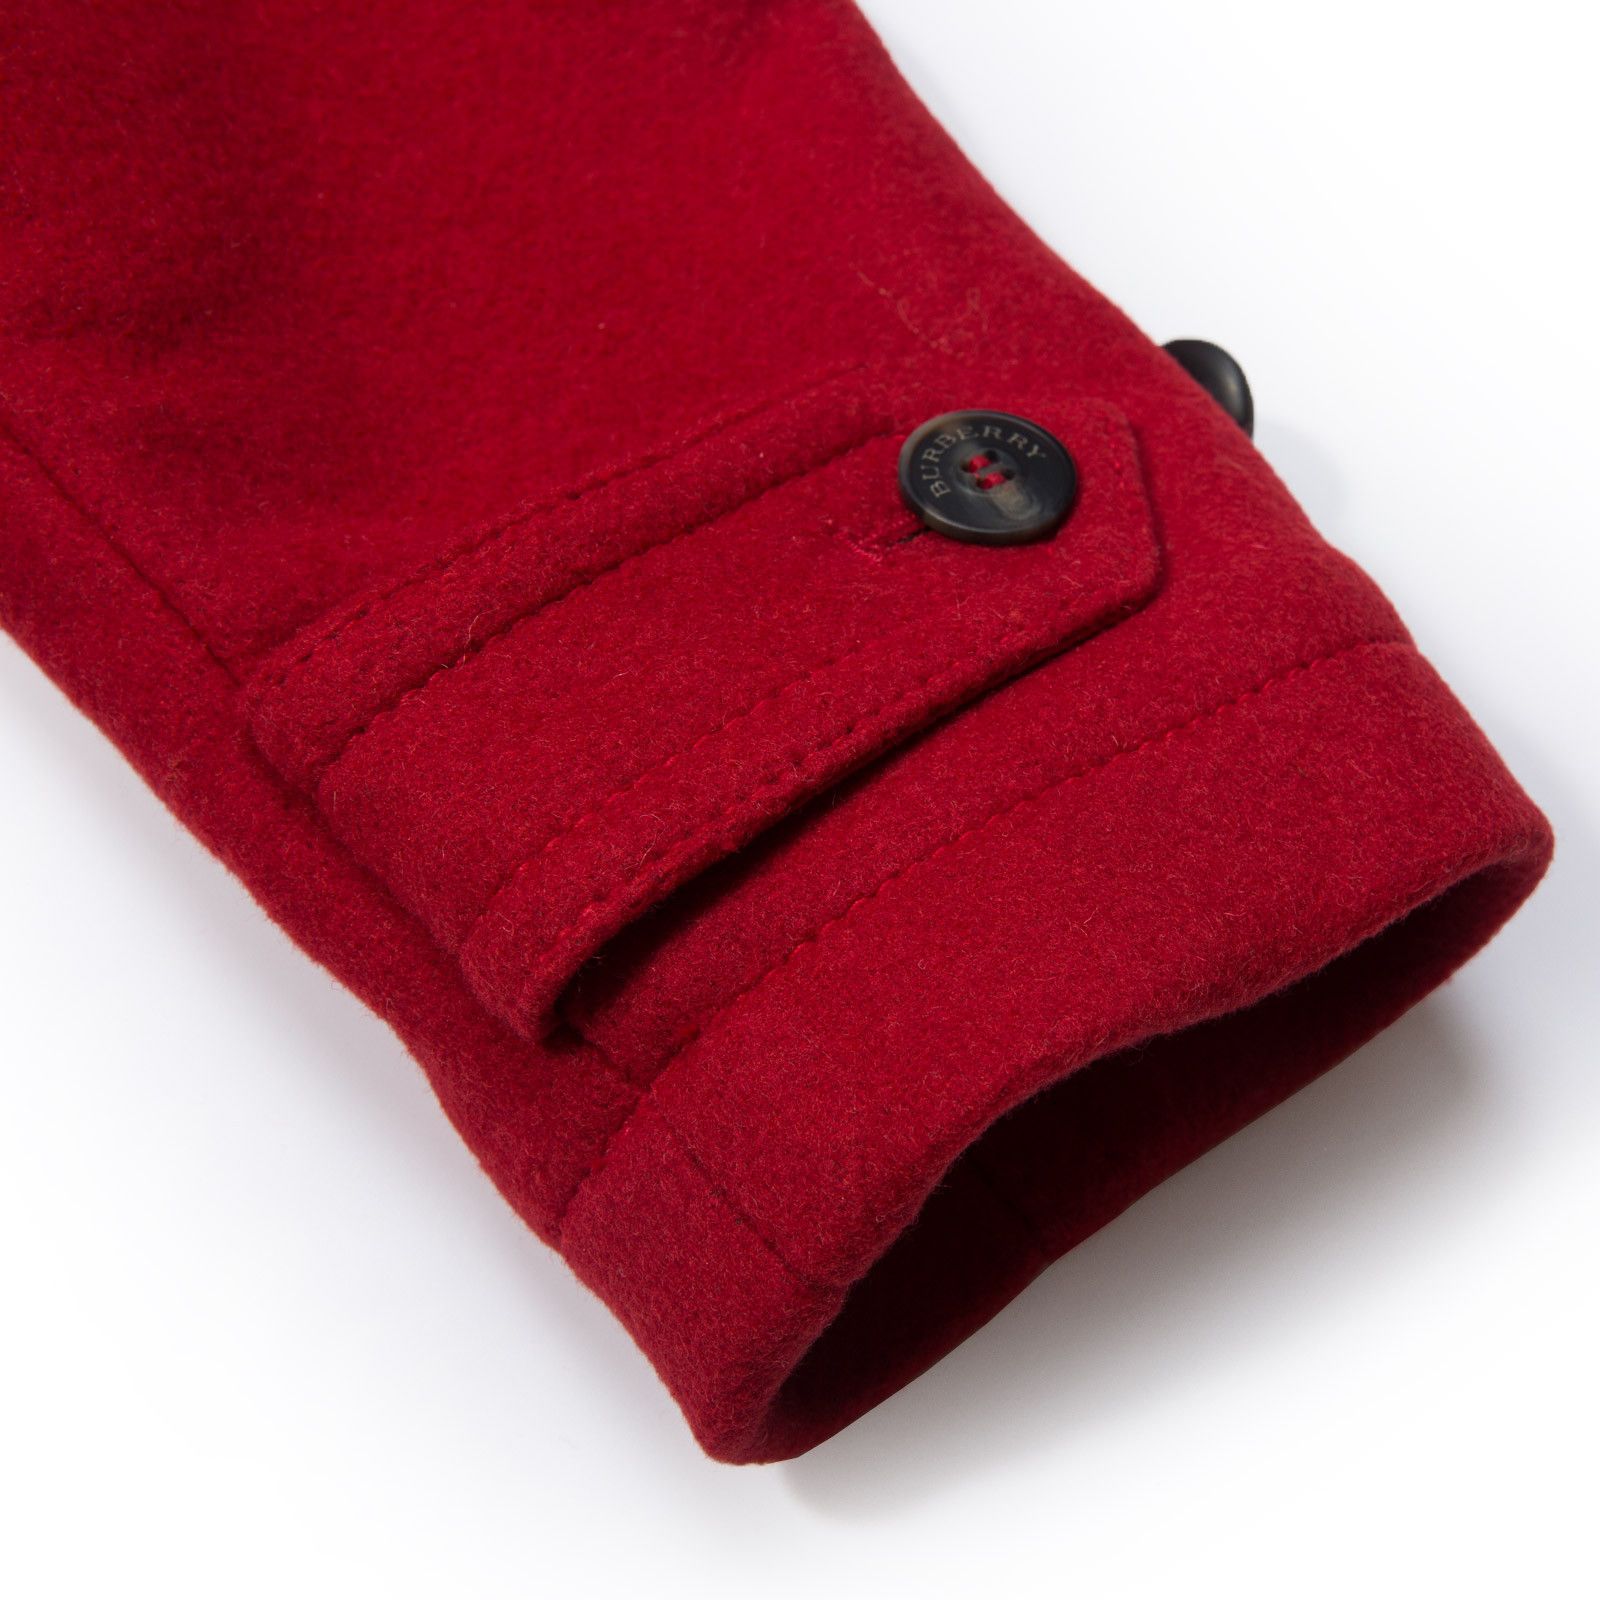 Boys Red Wool Duffle Coat With Pockets - CÉMAROSE | Children's Fashion Store - 5